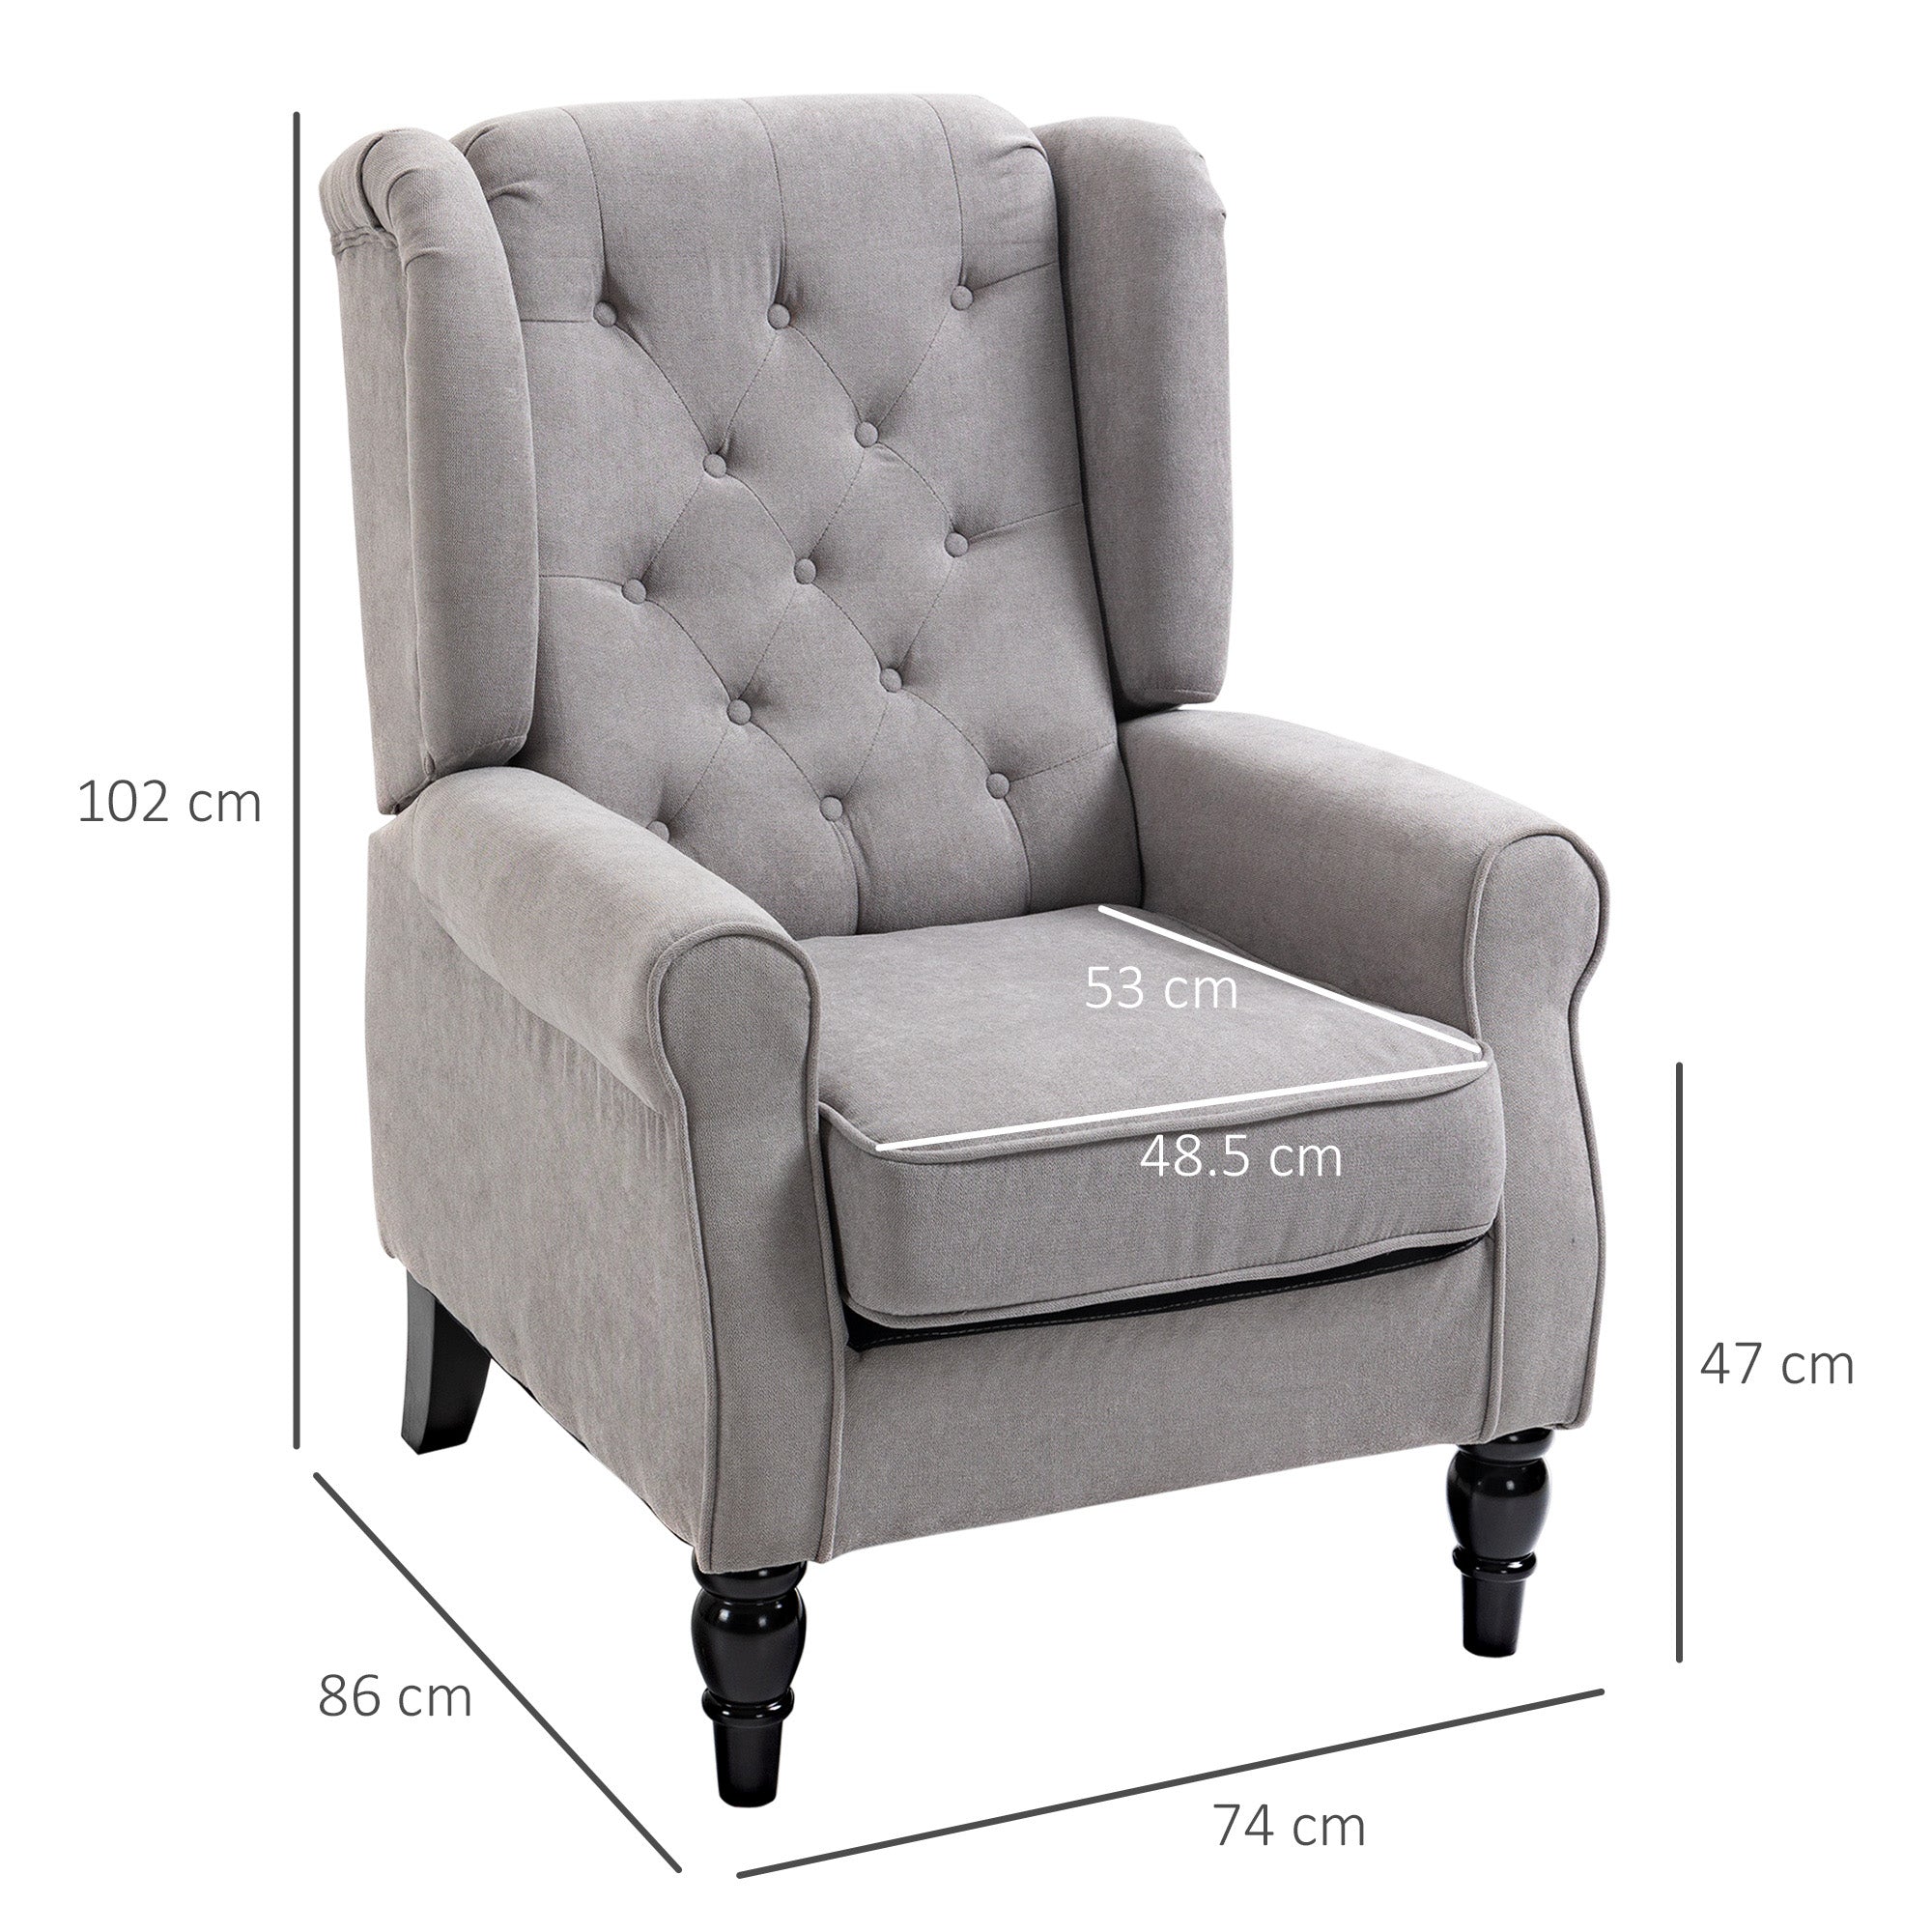 Retro Accent Chair, Wingback Armchair with Wood Frame Button Tufted Design for Living Room Bedroom, Grey-2